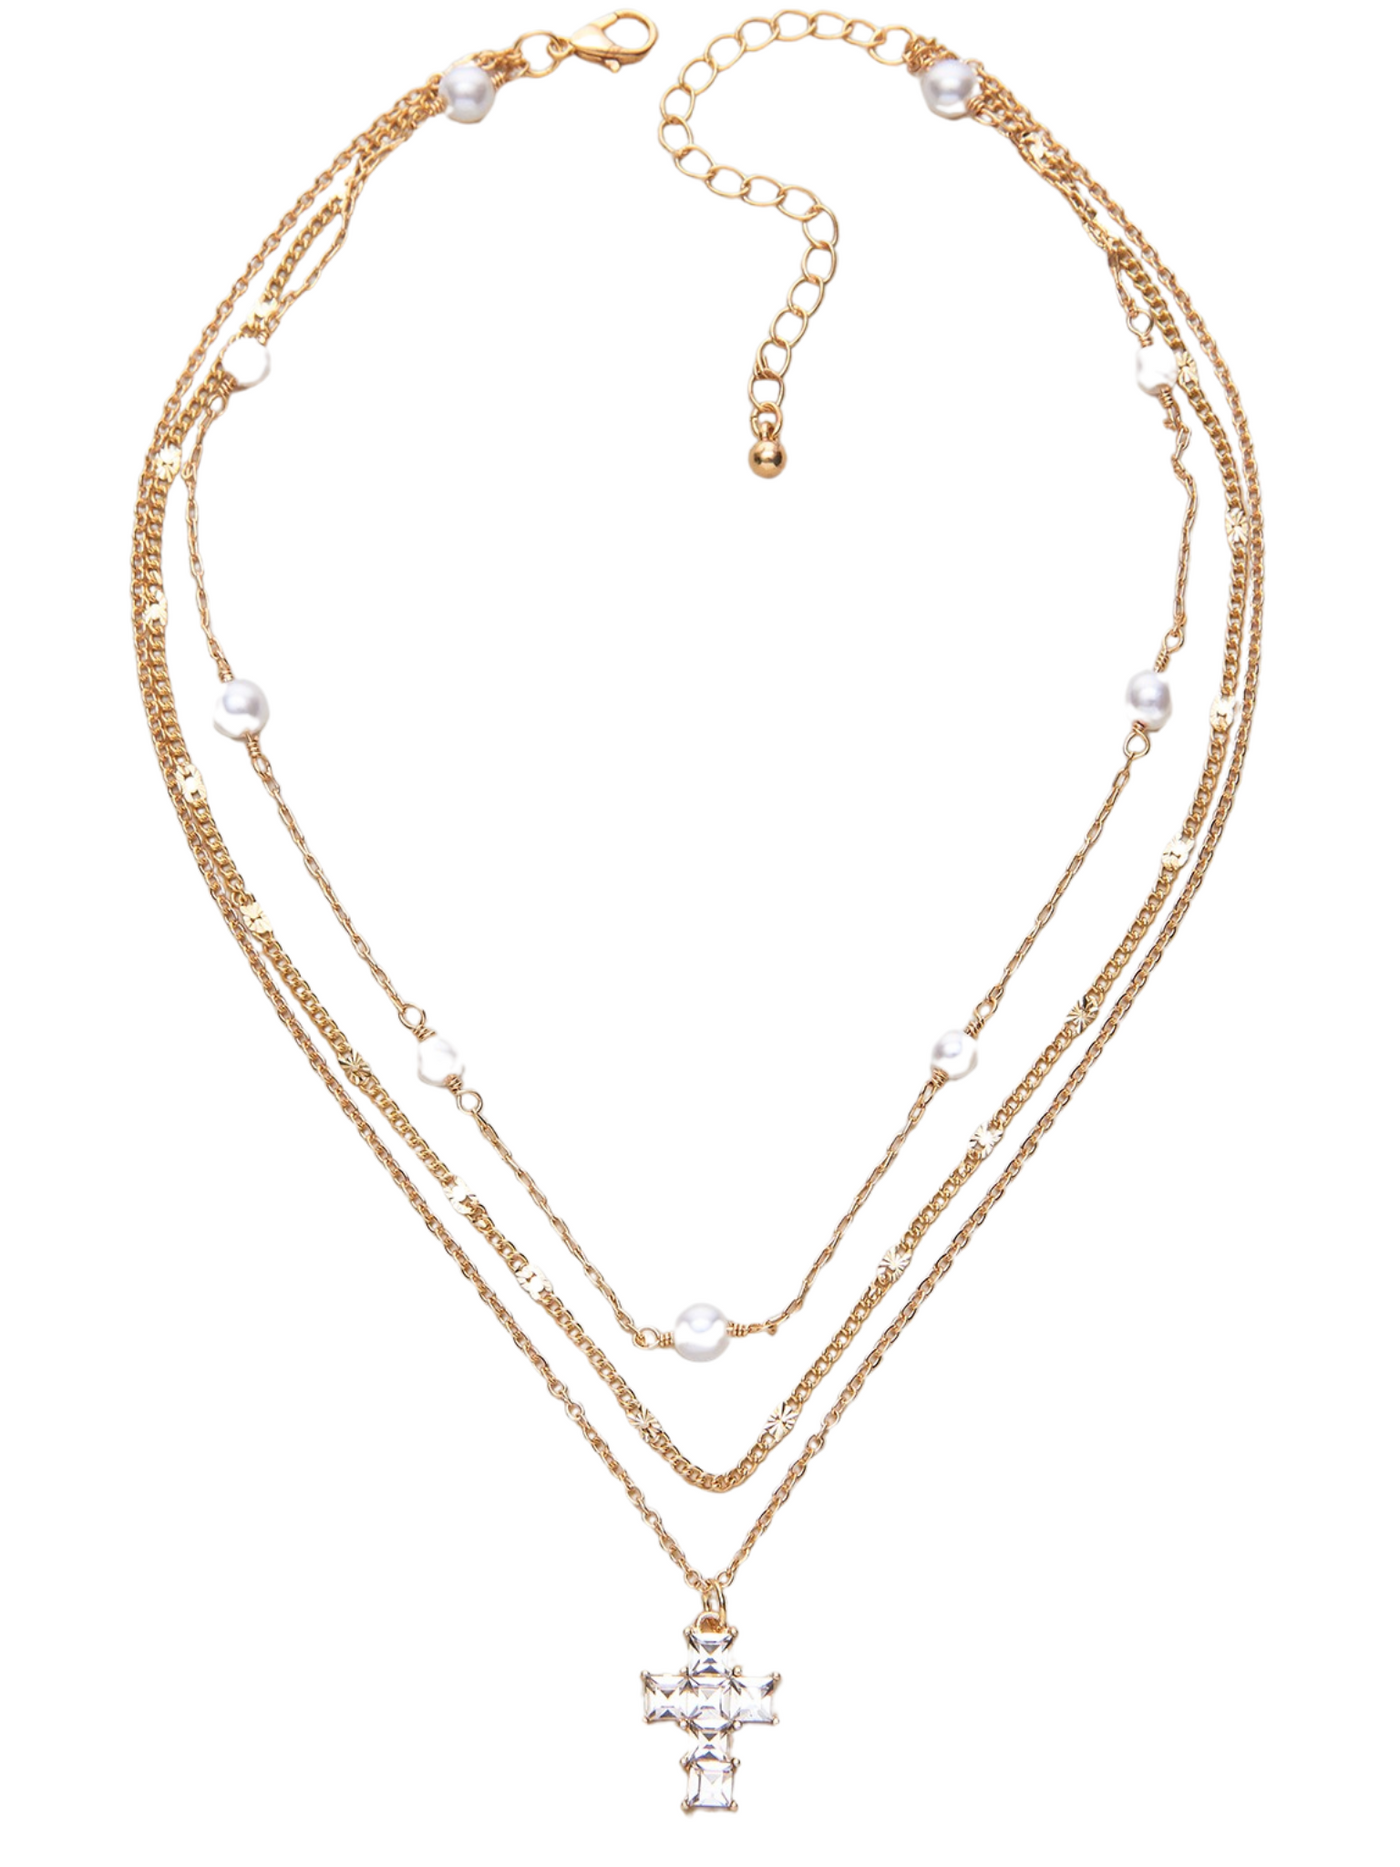 Layered Chain Necklace with Pearls and CZ Cross